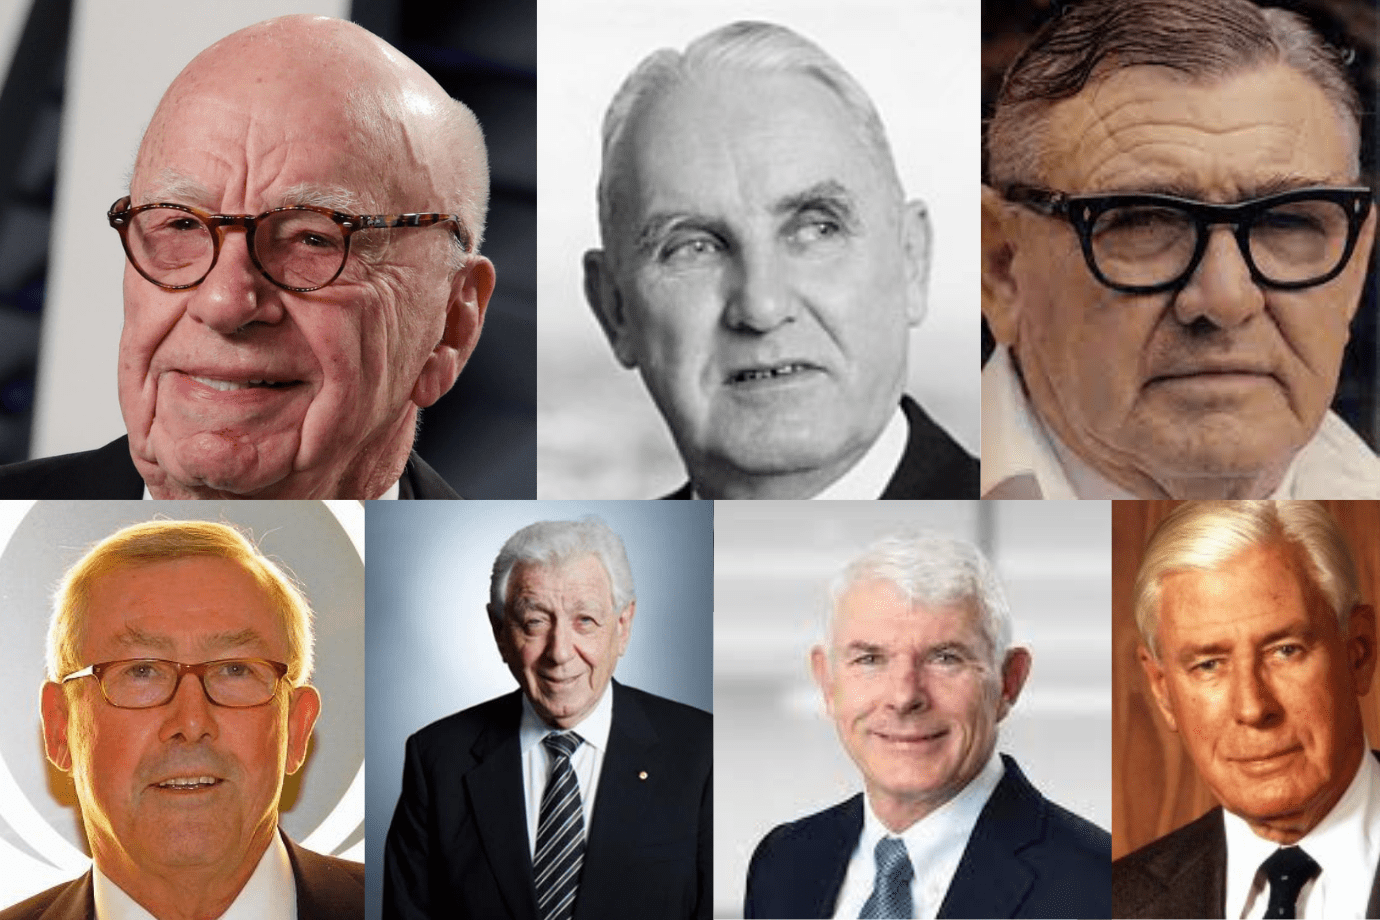 The didn't include one its 'Seven business legends who shaped Australia' list